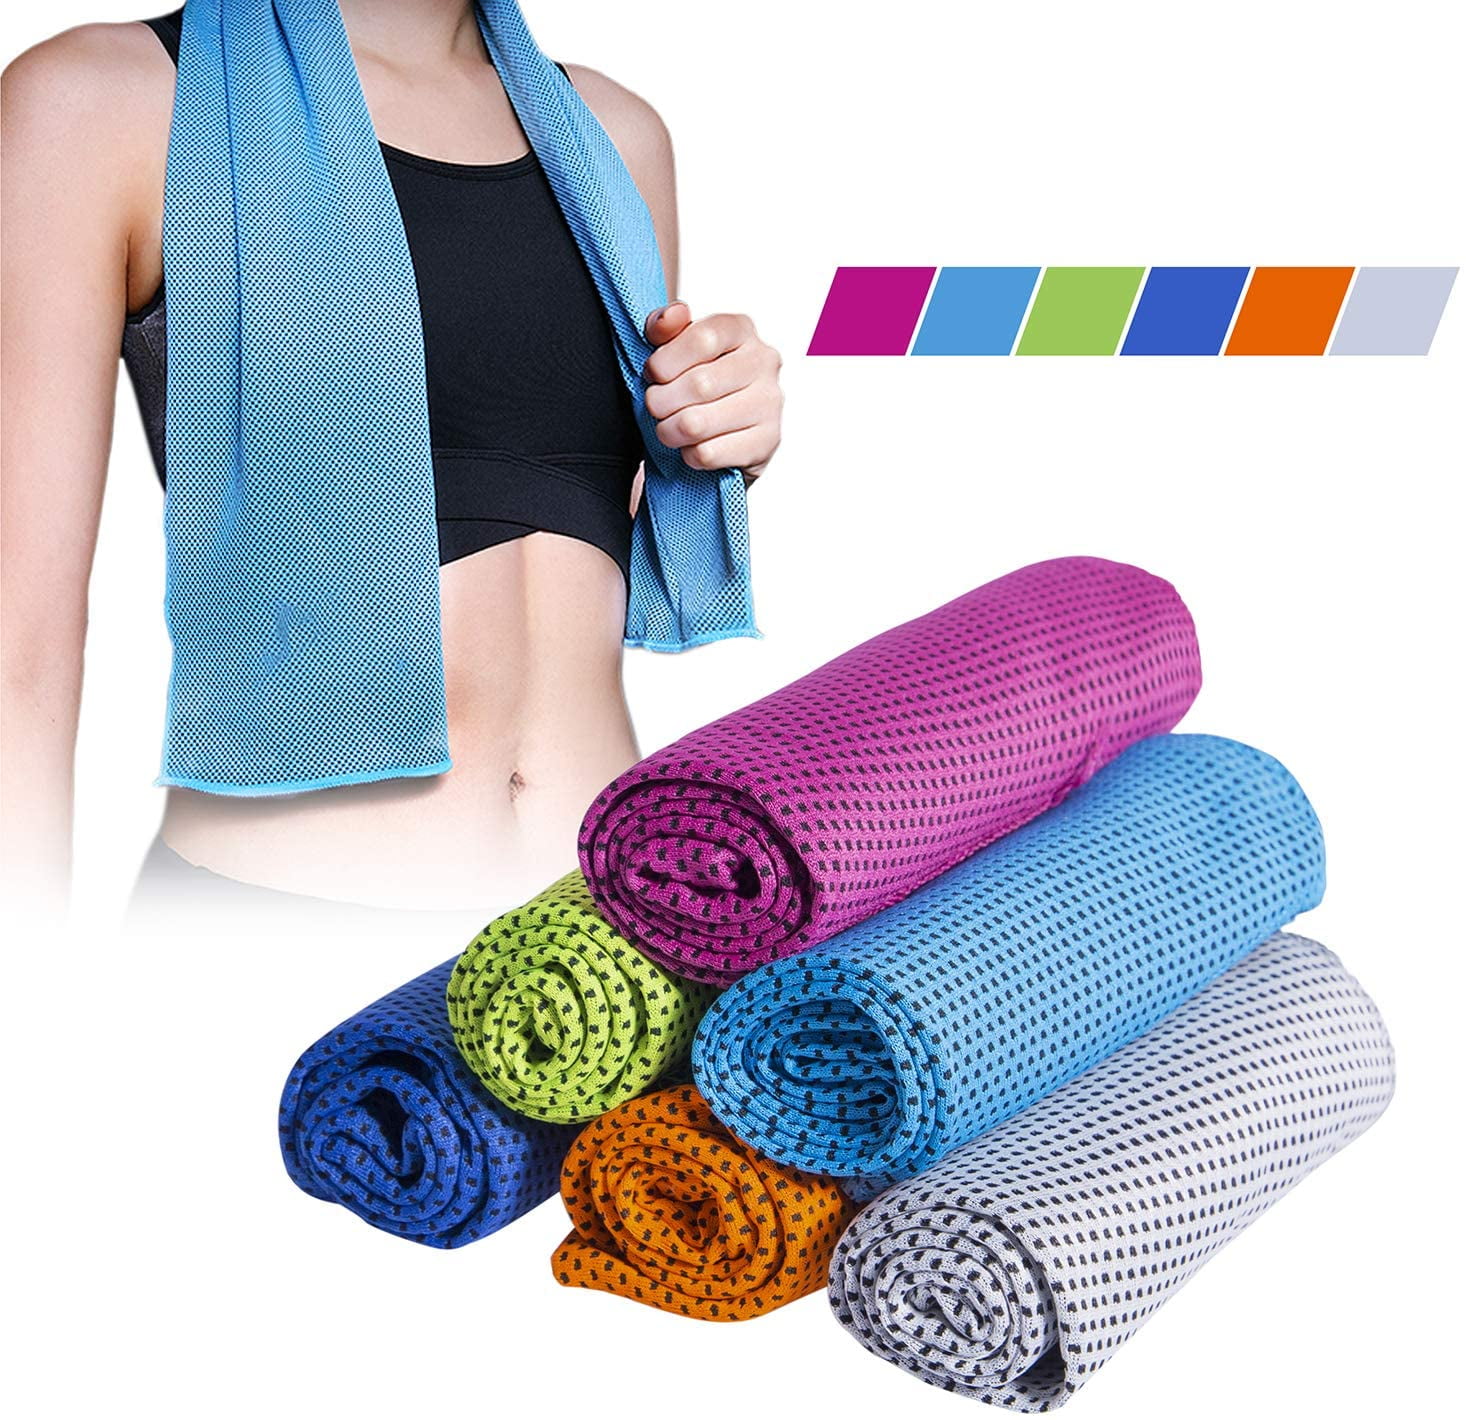 20pcs Ice Cold Instant Cooling Towel for Sports Gym Yoga Fitness Workout Jogging 